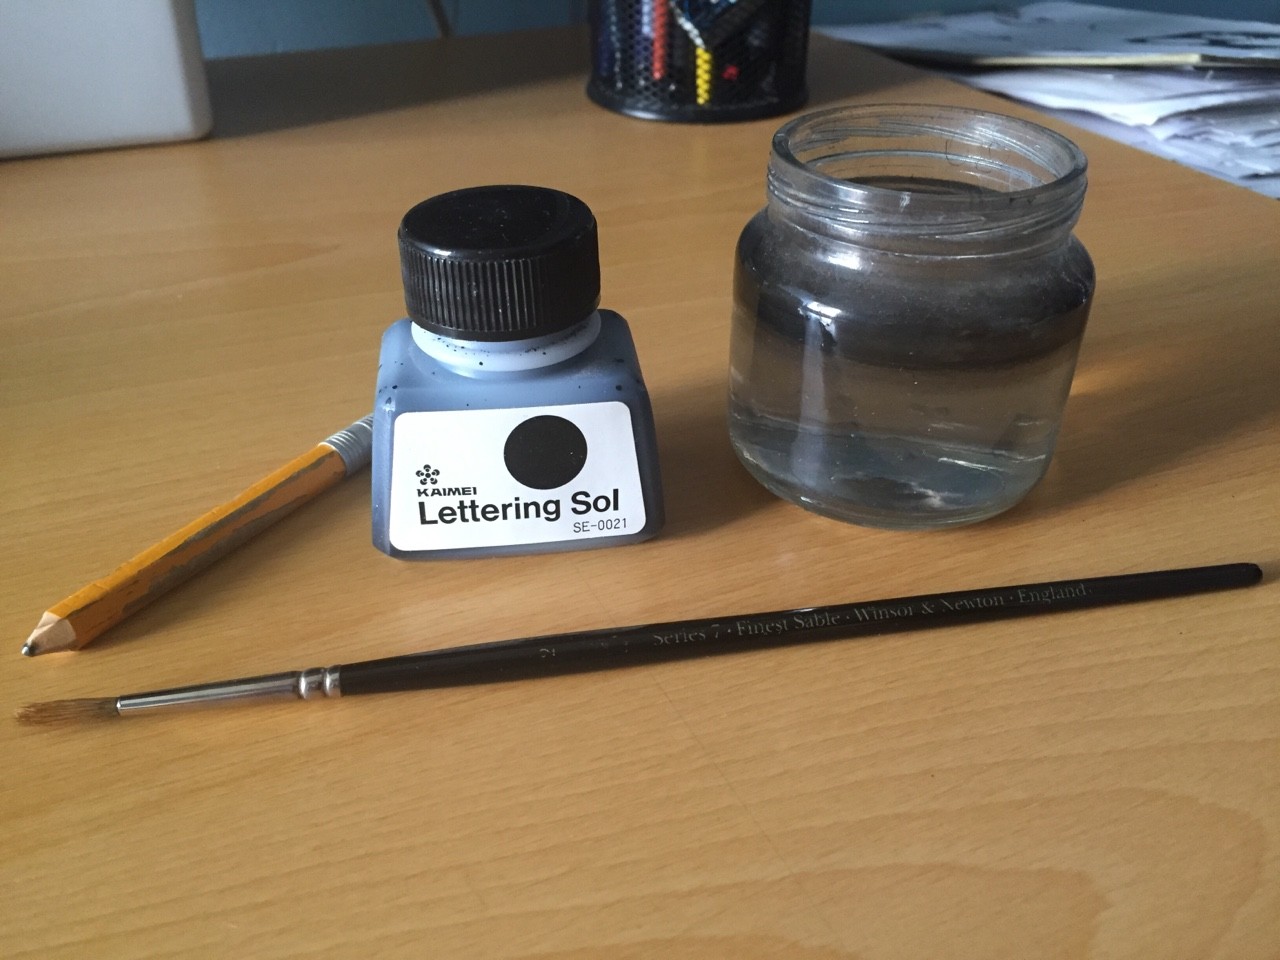 This are my main tools: My good old 3 year old pencil, a bottle of water, a #2 Series 7 Winsor and Newton brush, and drawing ink. The one I use is Kaimei Lettering Sol. Very nice ink and super water resistant. 